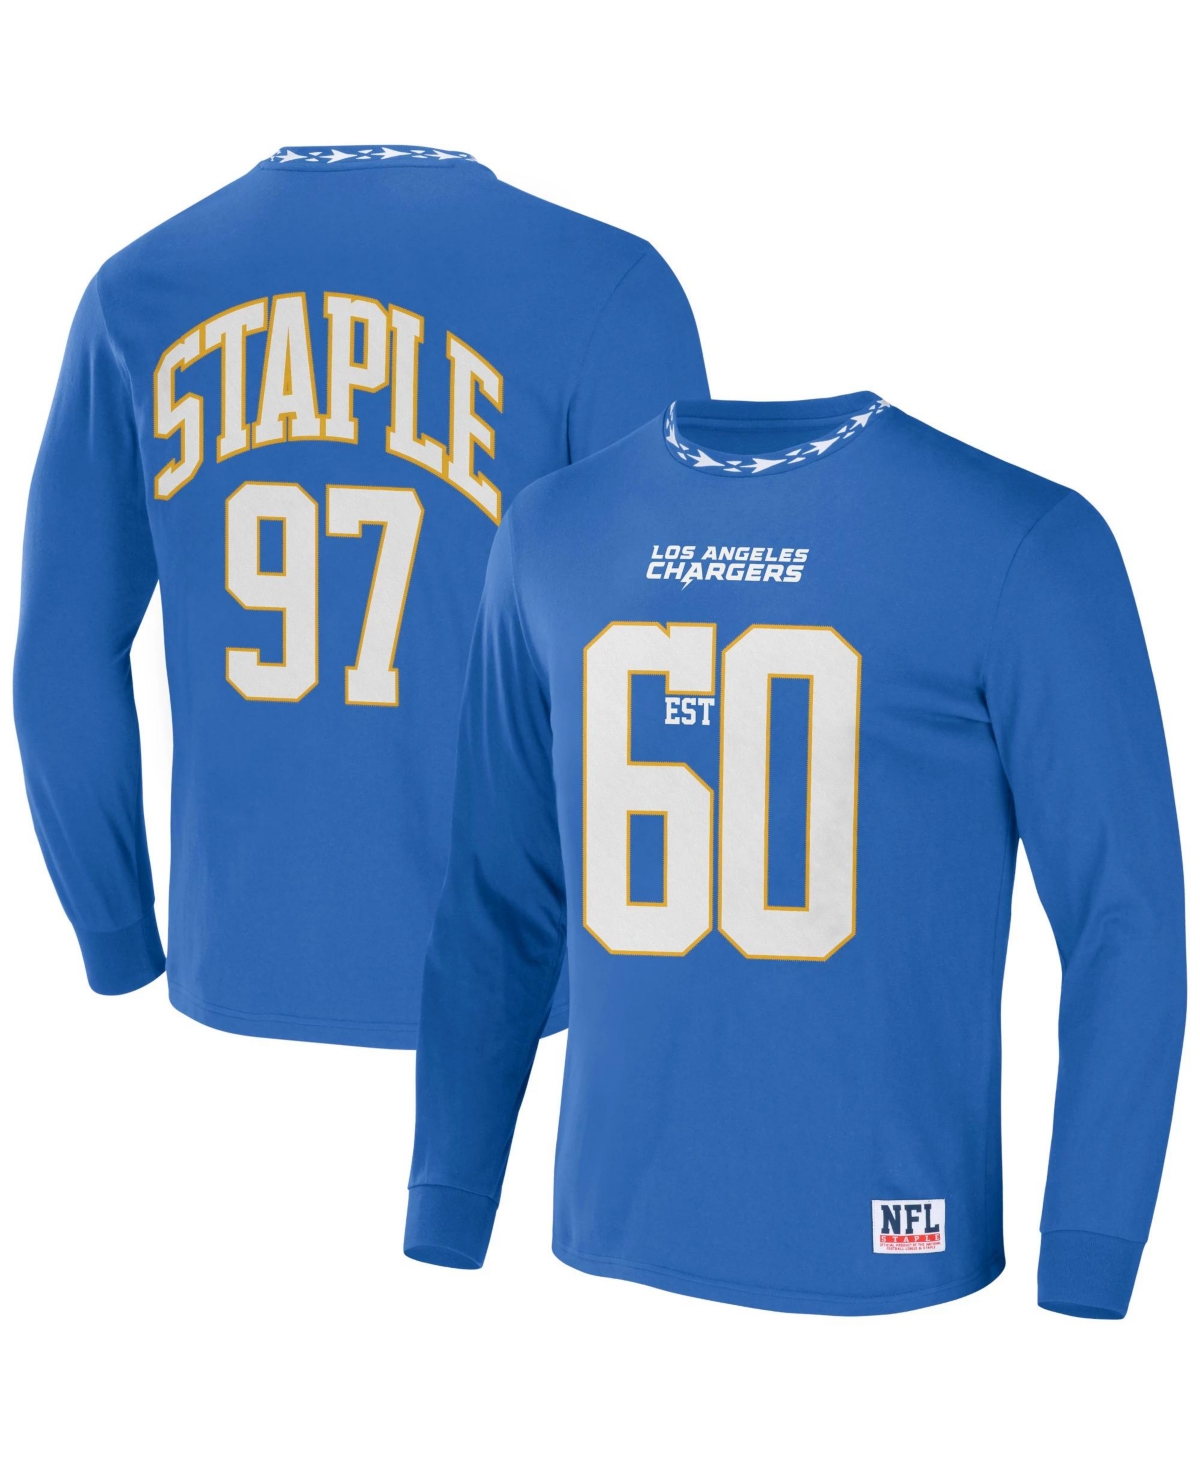 Nfl Properties Men's Nfl X Staple Blue Los Angeles Chargers Core Long Sleeve Jersey Style T-shirt